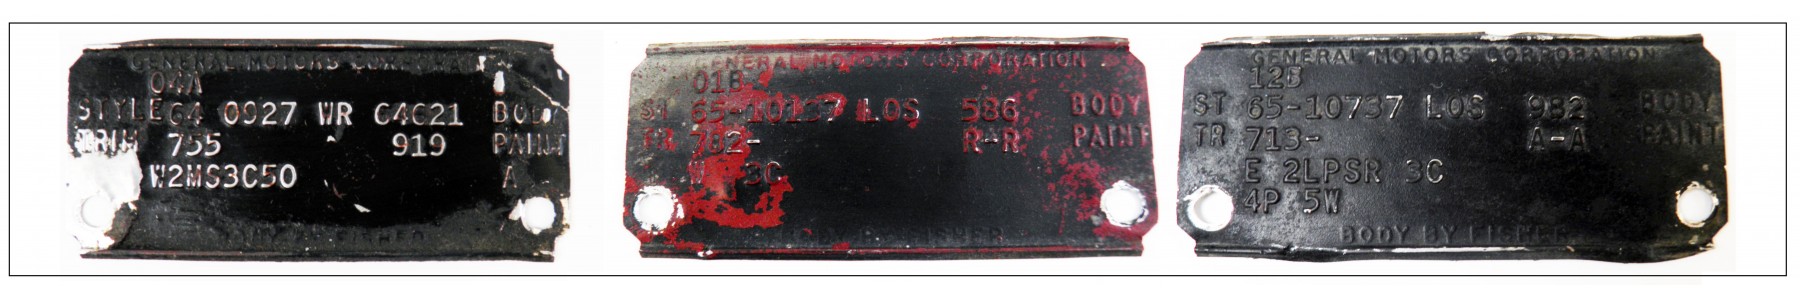 USED 1968-69 BODY TAGS